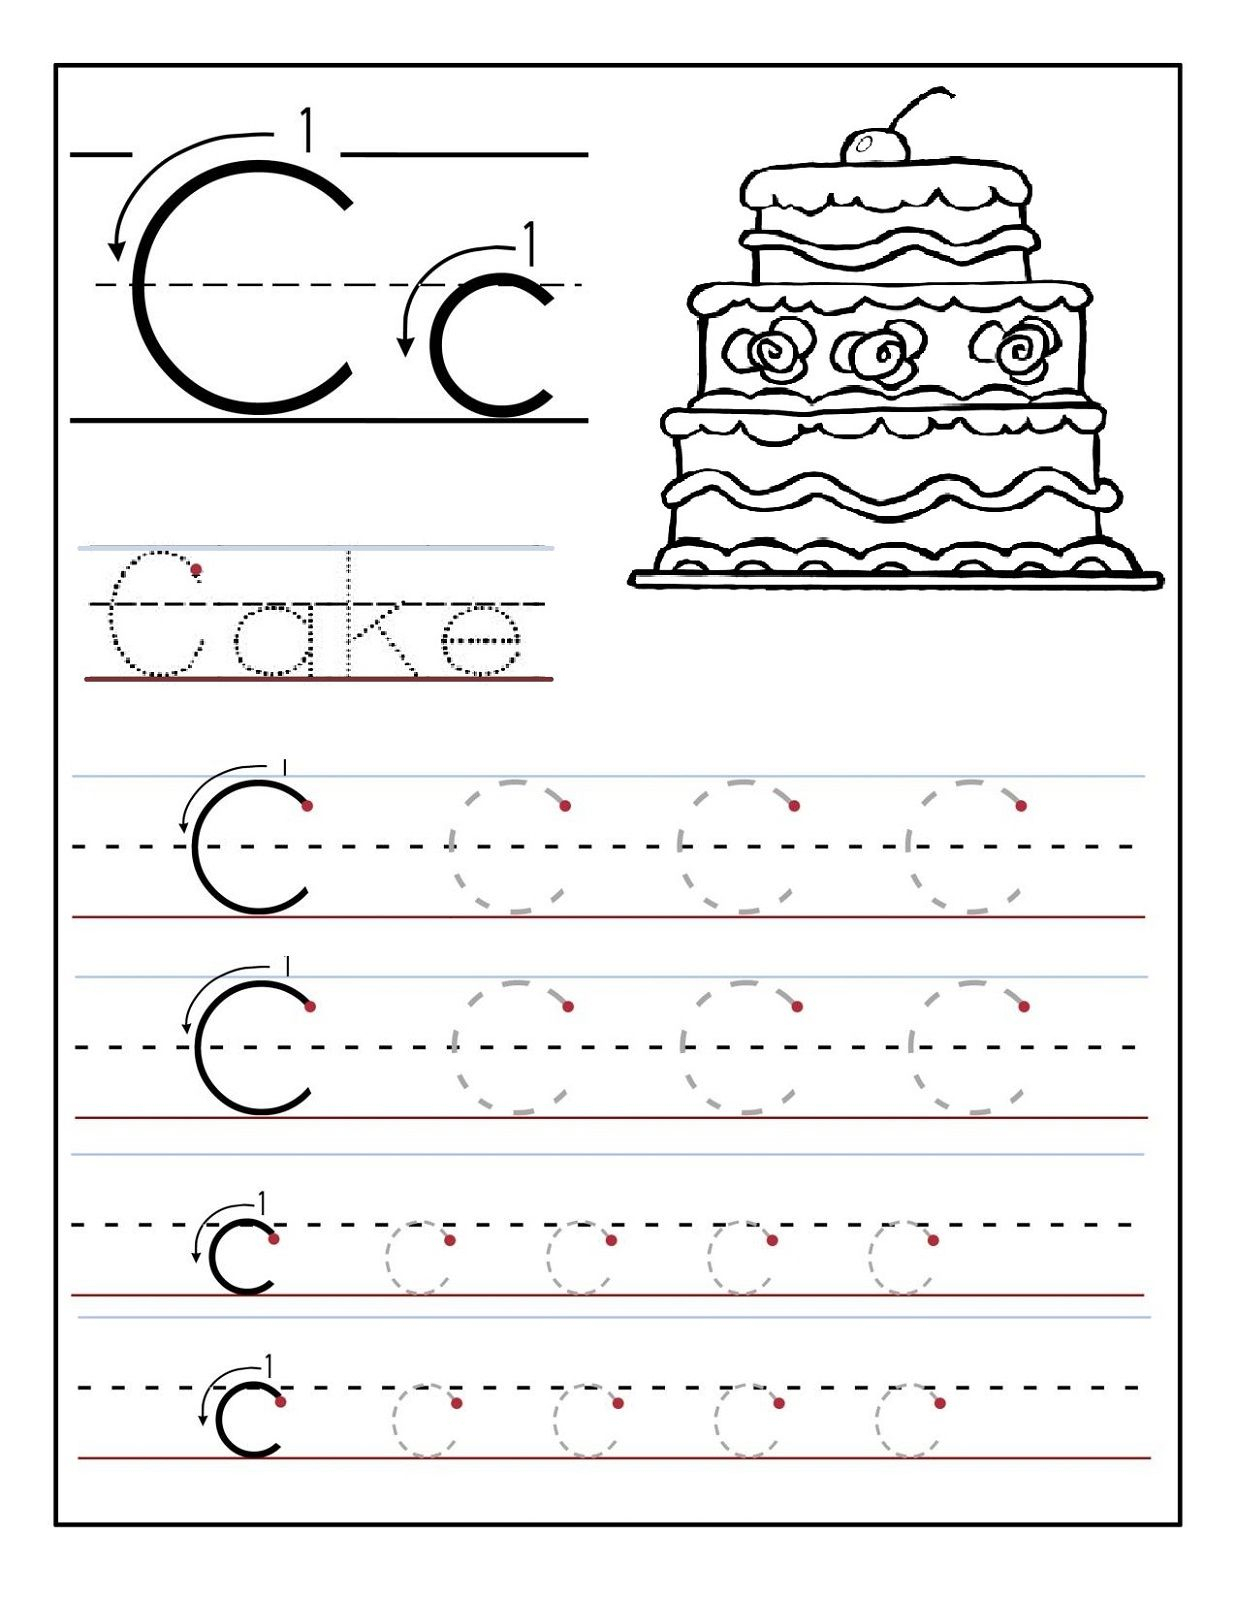 Trace The Letter C Worksheets | Preschool Worksheets, Letter inside Tracing Letter C Worksheets